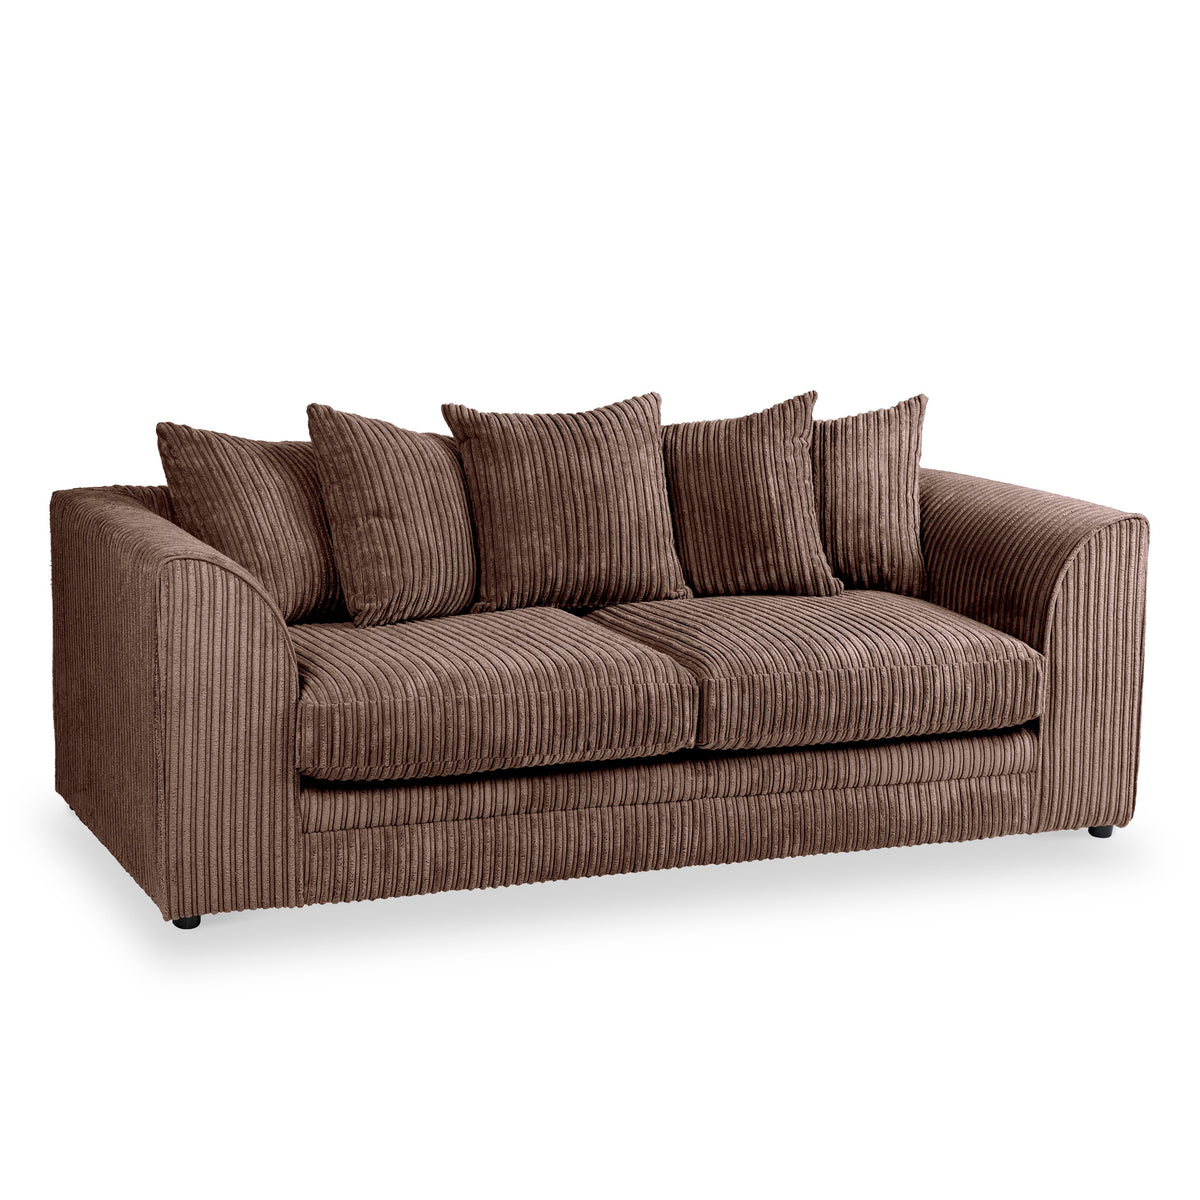 Bletchley Chocolate Jumbo Cord 3 Seater Couch  from Roseland Furniture